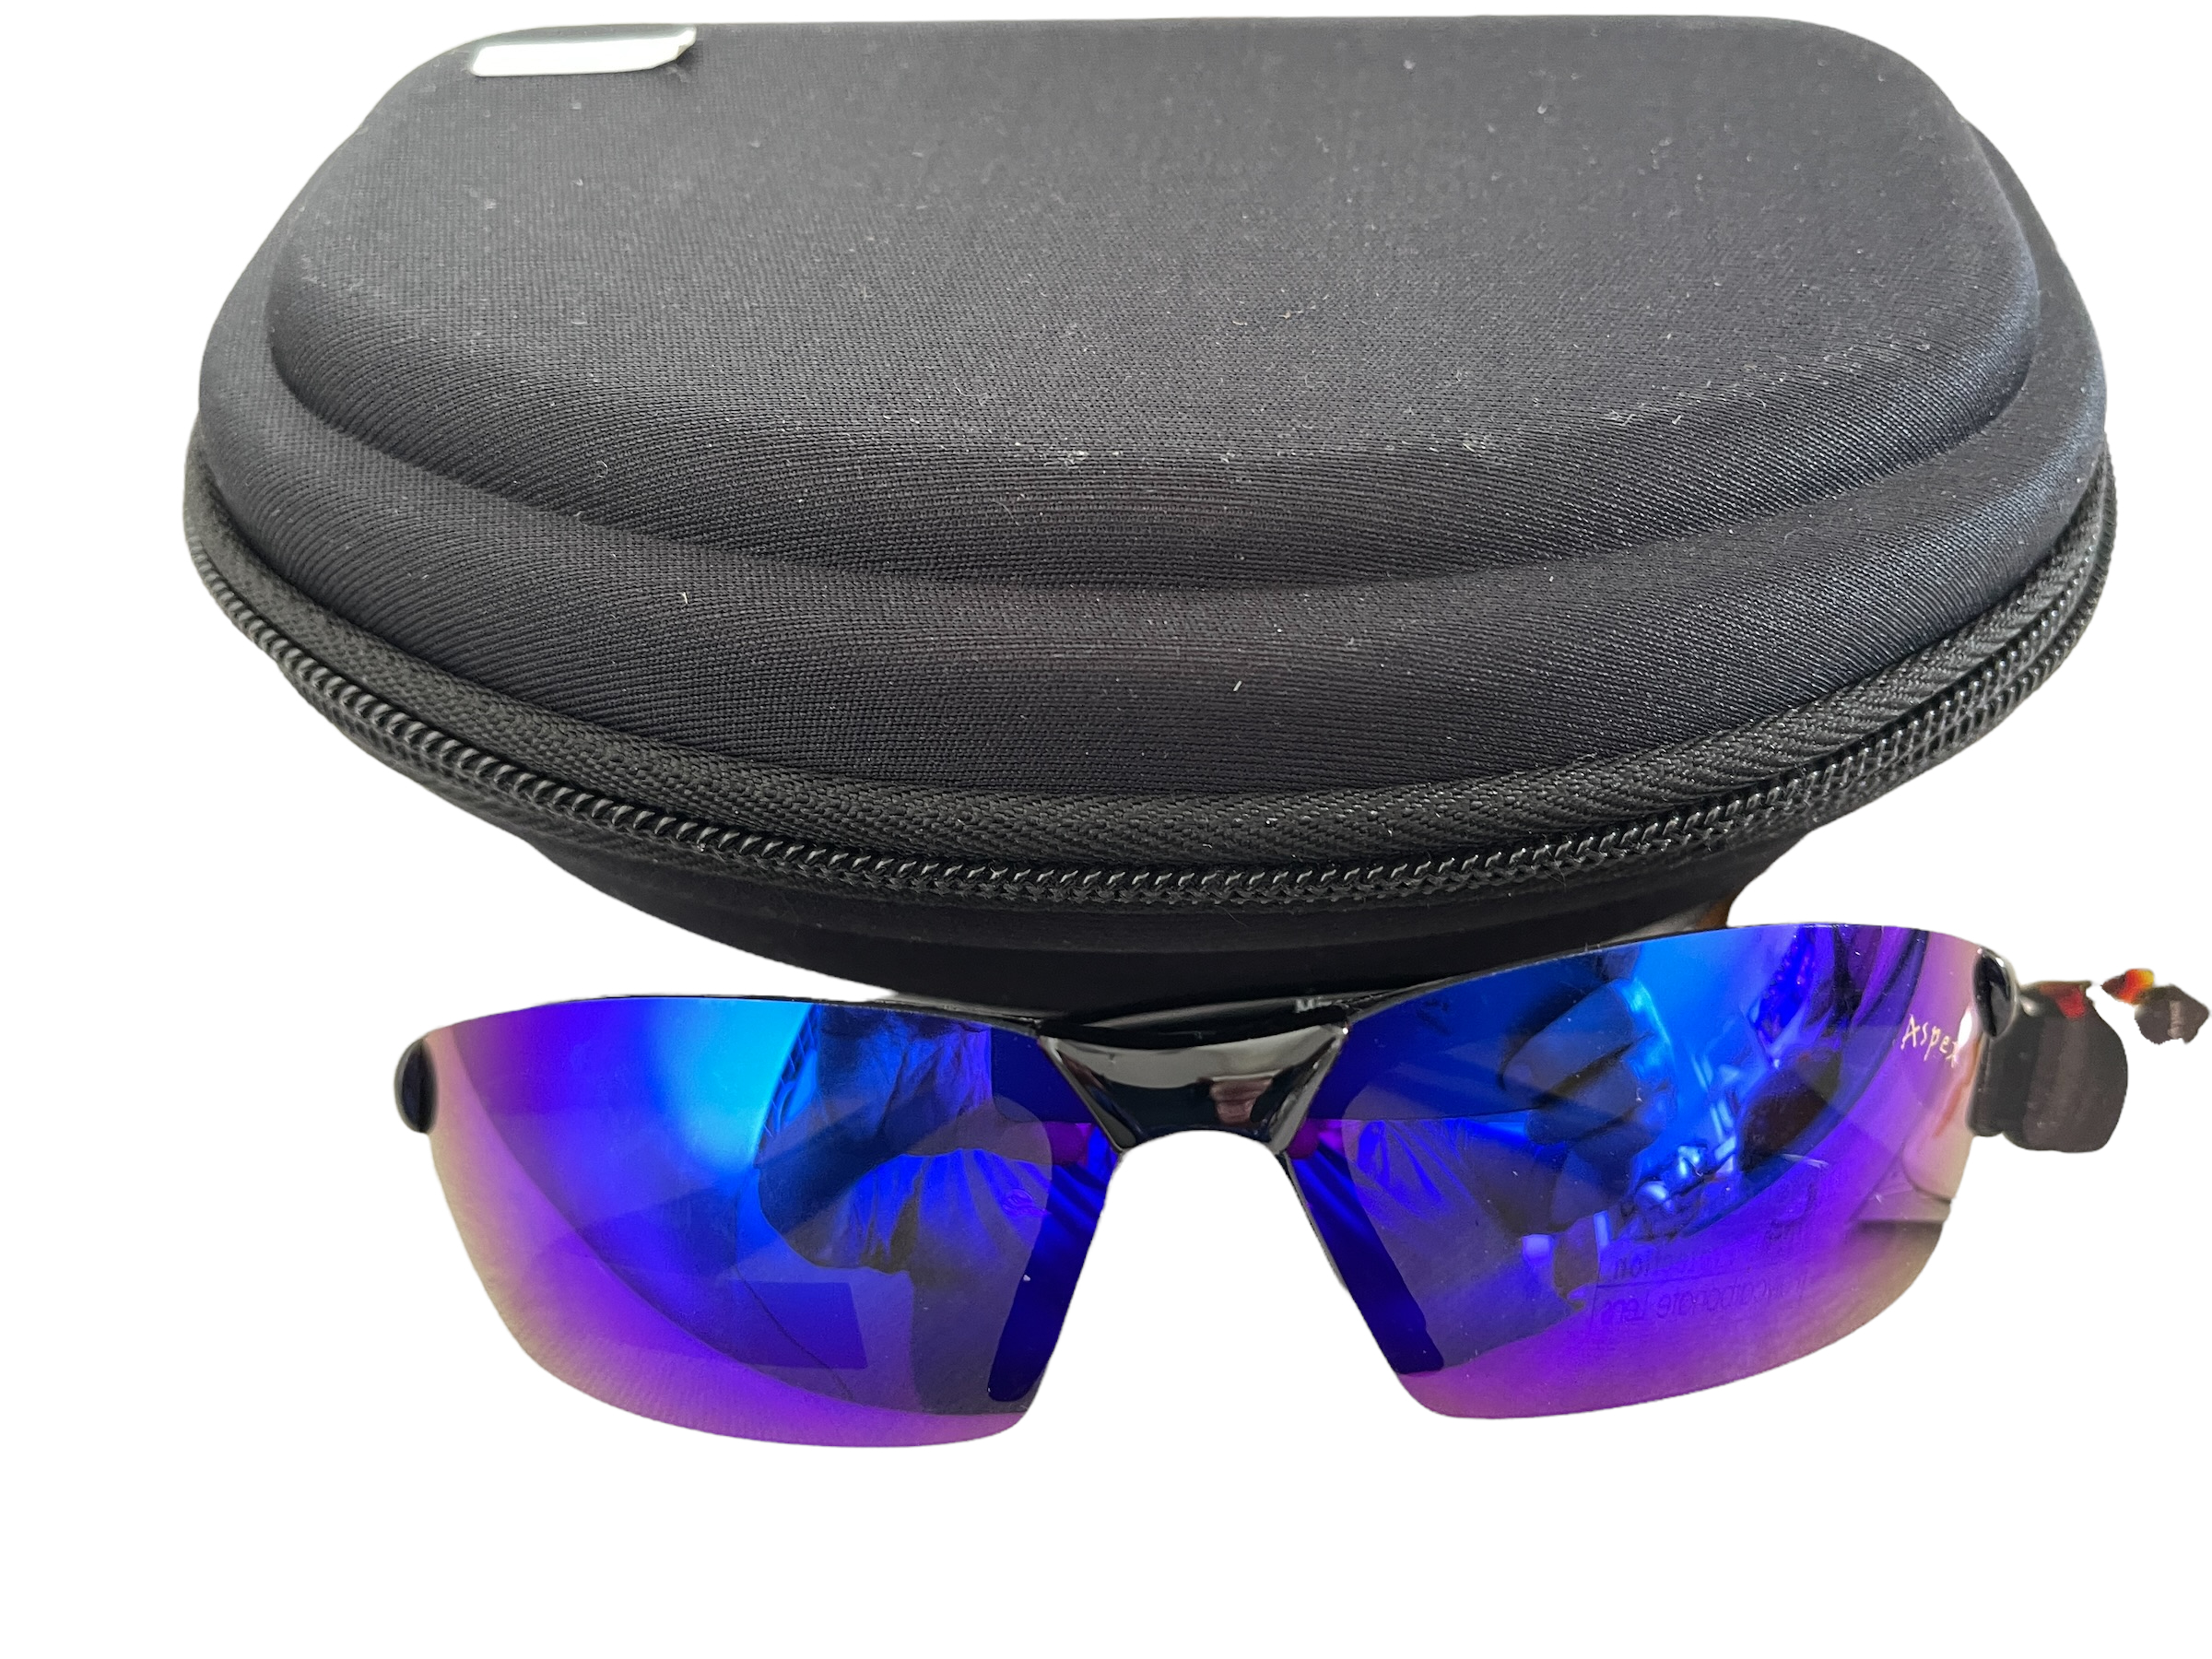 Aspex Sunglasses with Case Cloth Lenses Surplus Stock from Our private jet charter. - Image 2 of 5